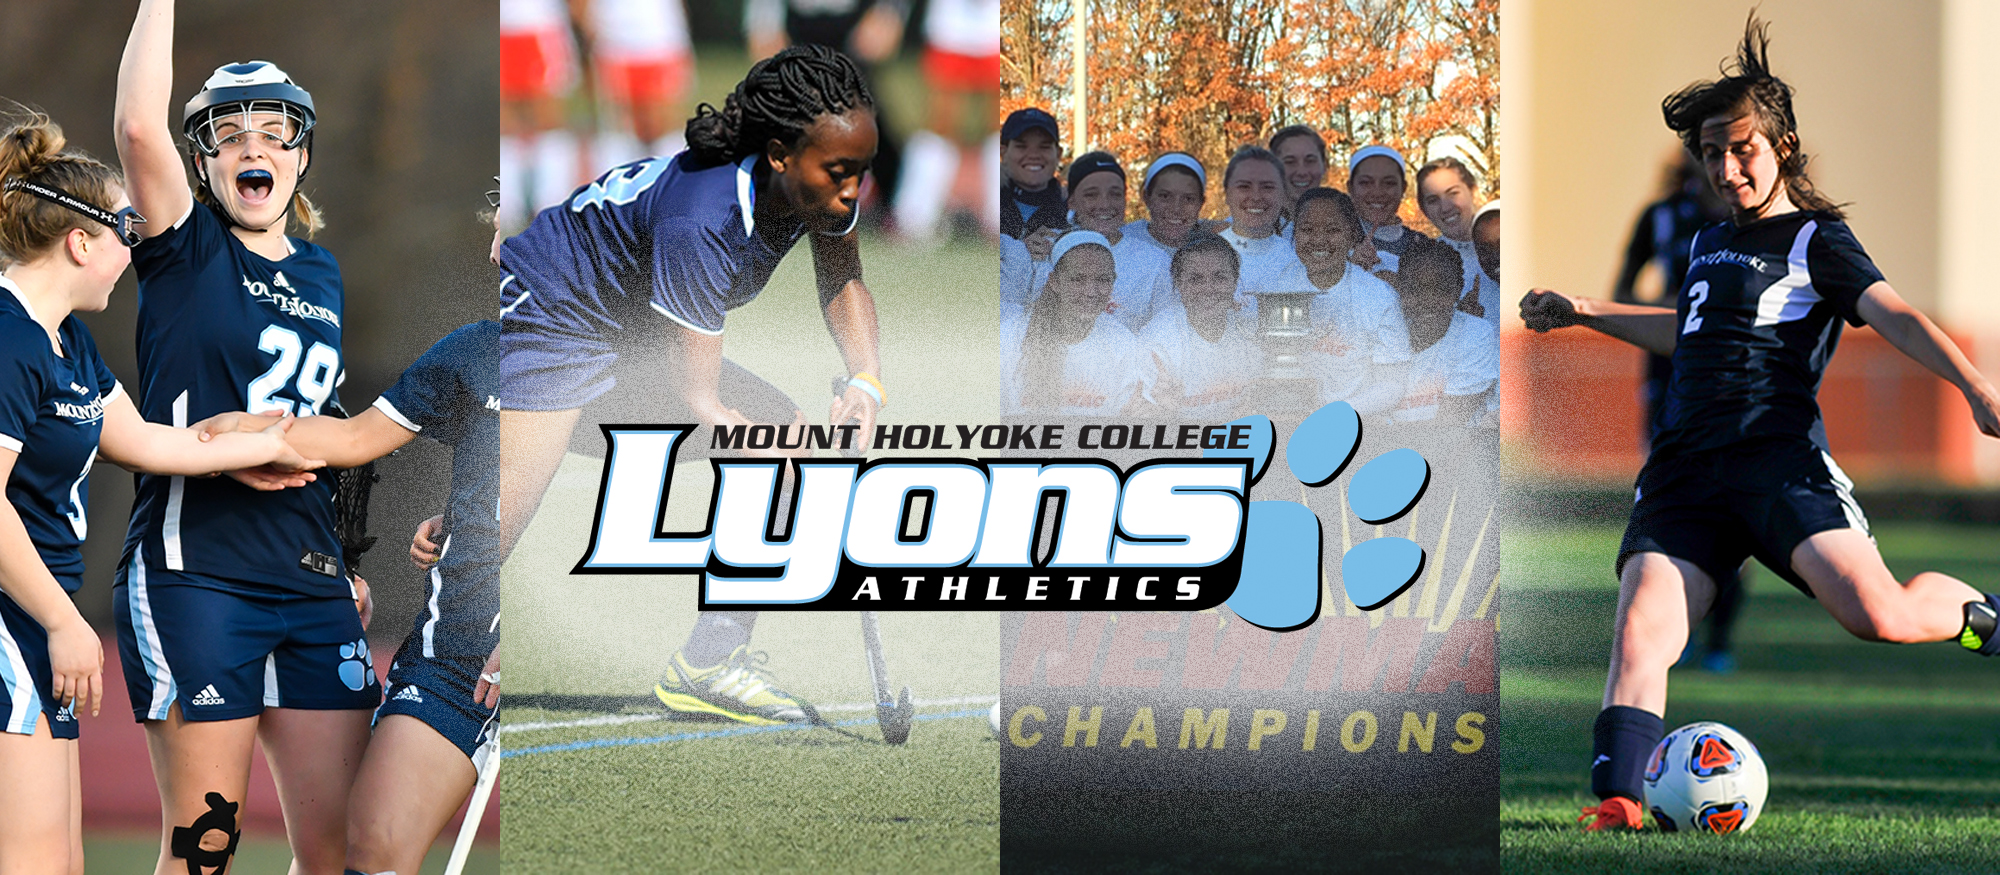 Mount Holyoke College Athletics to Air "Instant Classics" in April